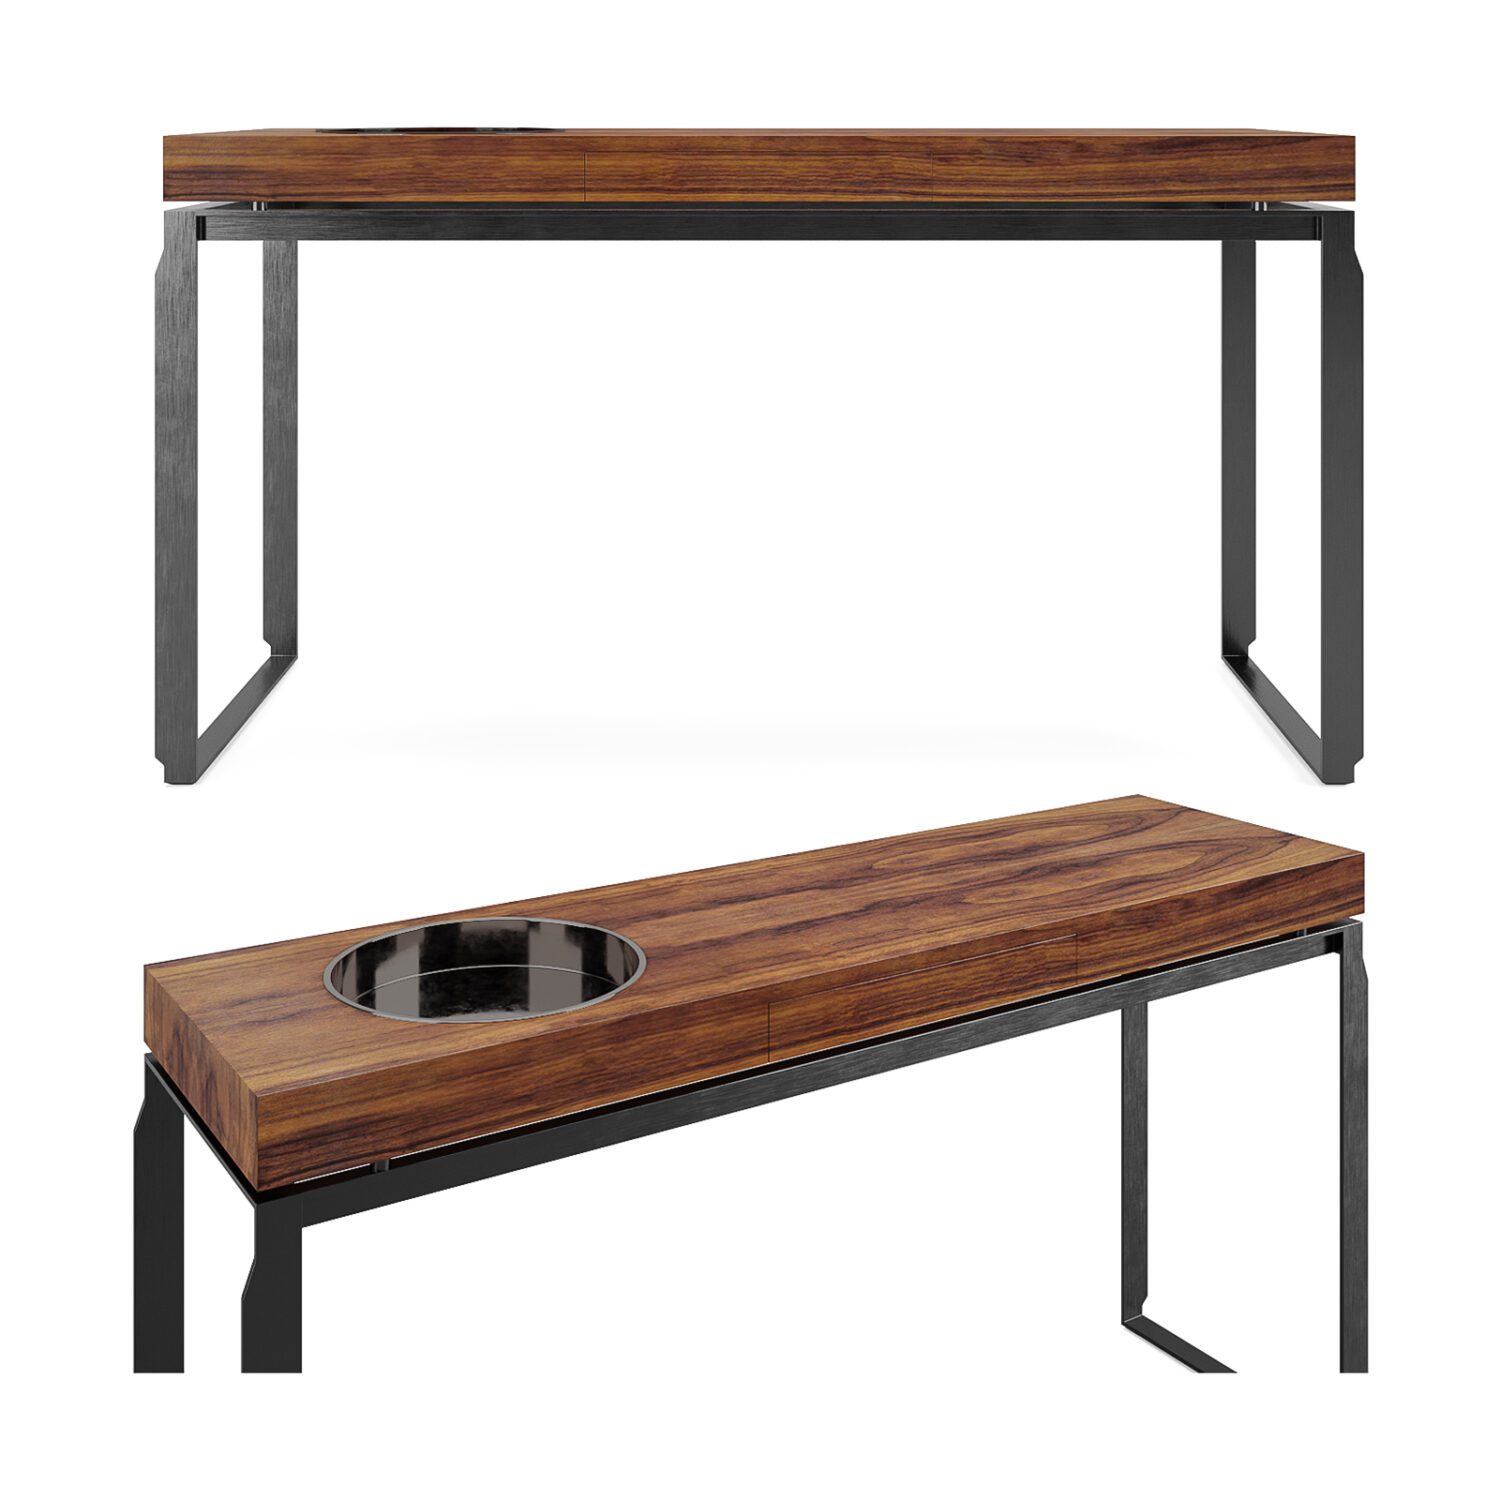 11159. Download Free 3D Console Table Model By Giang Hoang